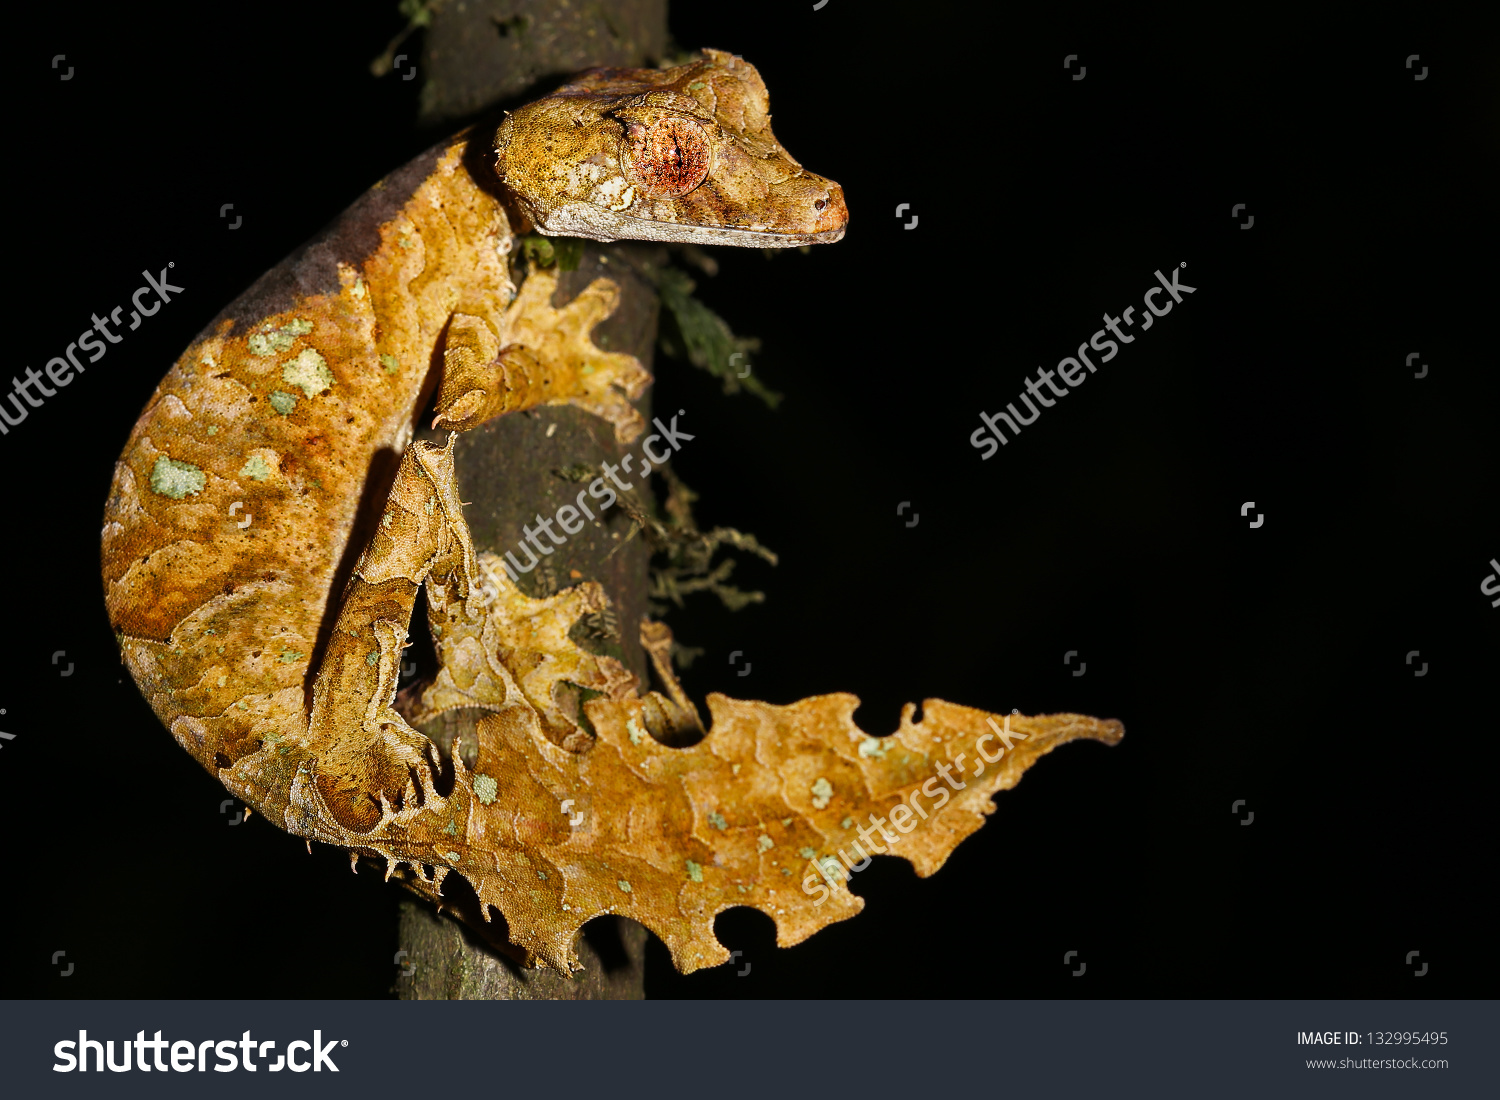 Satanic Leaf-tailed Gecko clipart #11, Download drawings